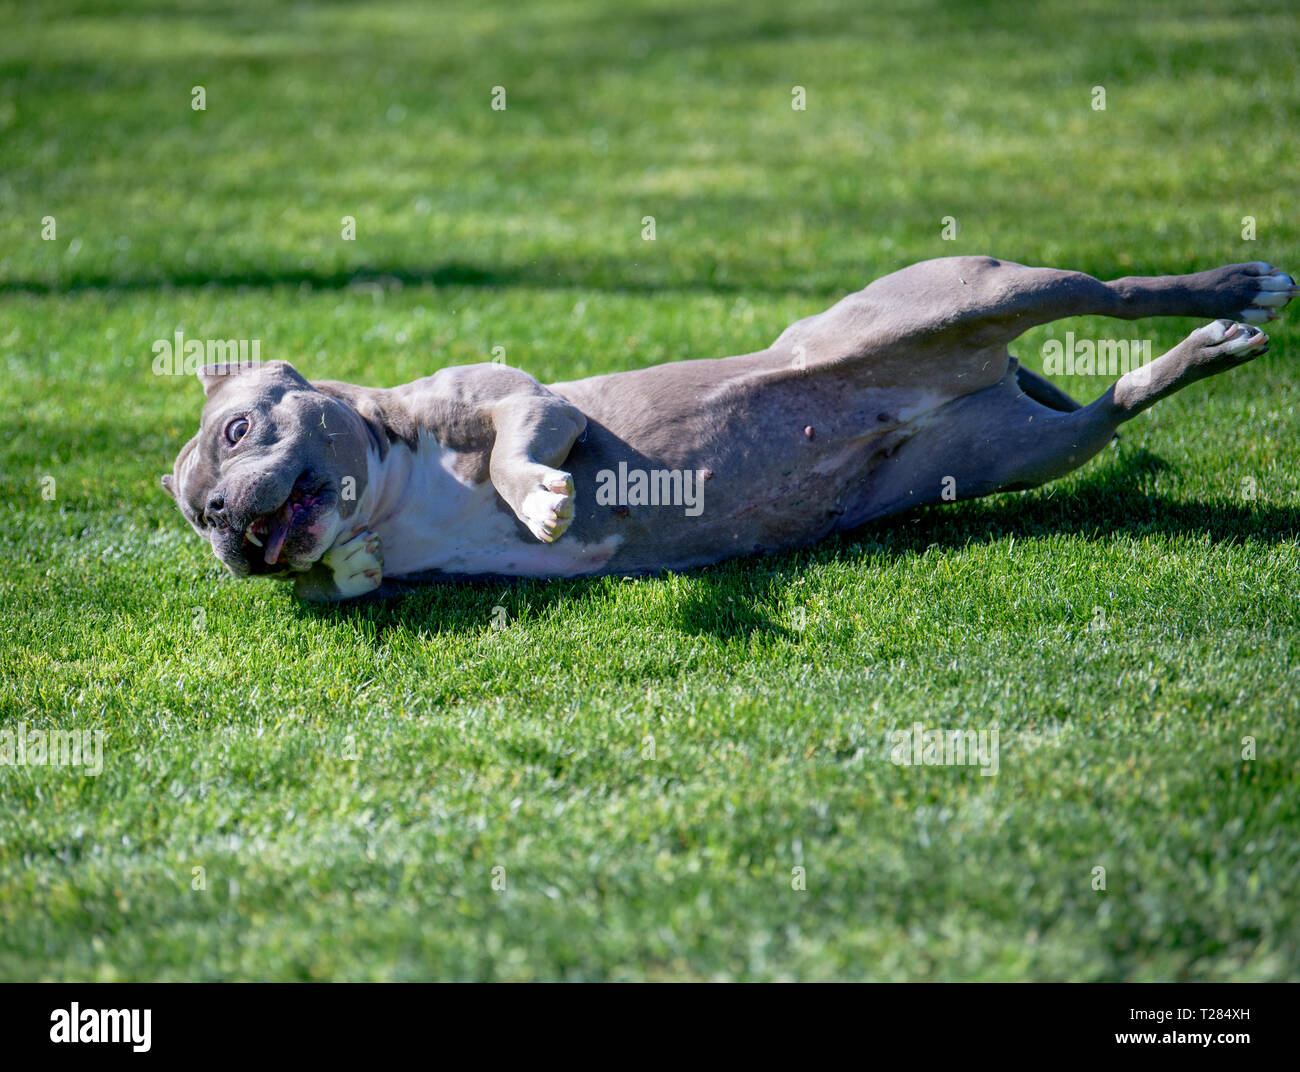 Dog making a funny face while rolling in the grass Stock Photo